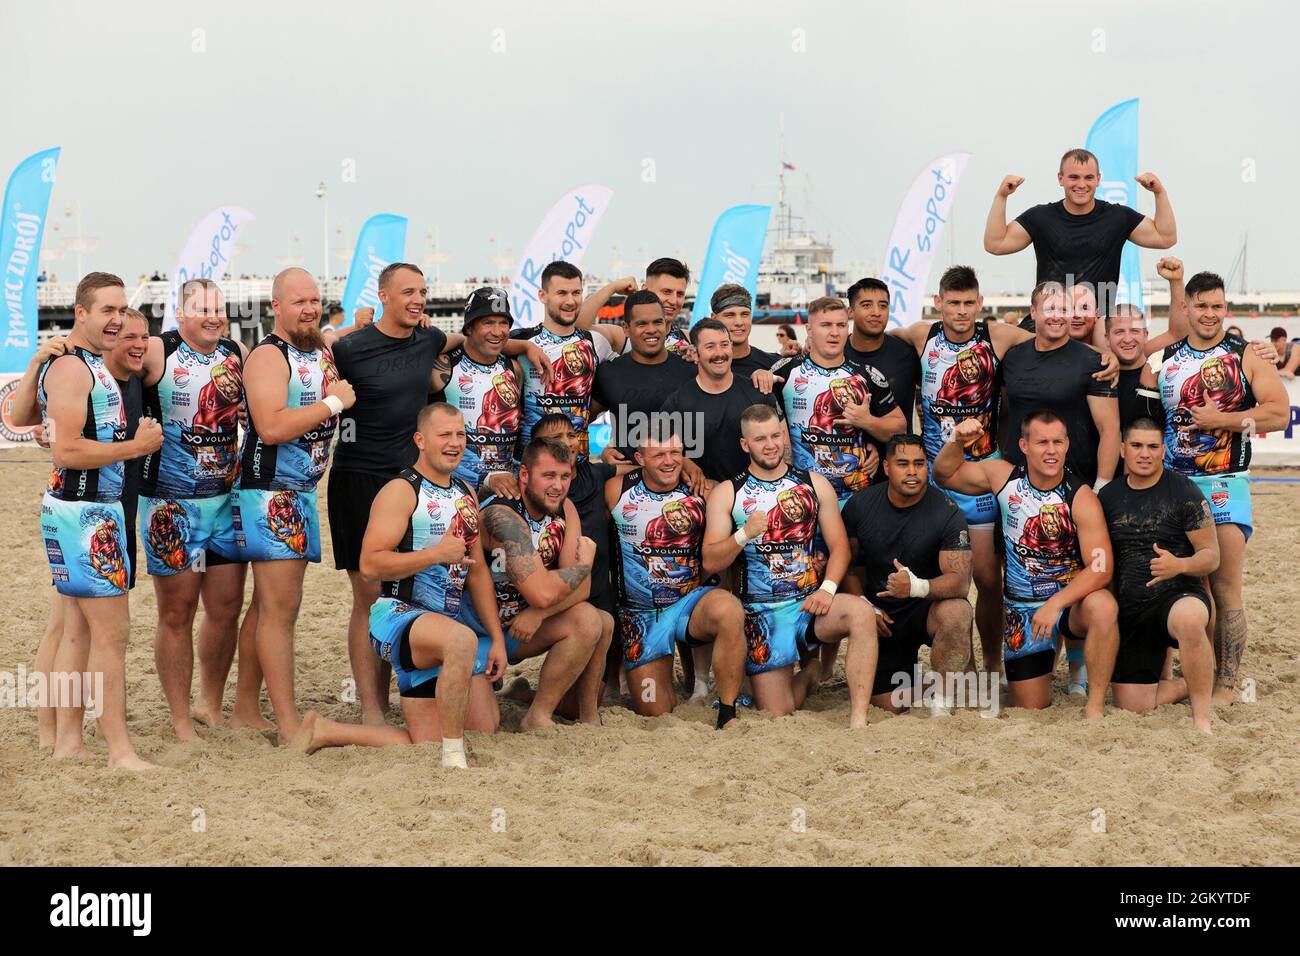 Members of 3rd Battalion “Dark Rifles,” 161st Infantry Regiment (dark jerseys) celebrate with defending champion Posnania after the opening match of the 9th Sopot International Beach Rugby Tournament July 31, 2021 on the main beach in Sopot, Poland. Rugby has an enduring tradition of fellowship through brutal competition with post-match customs emphasizing sportsmanship and camaraderie. Stock Photo